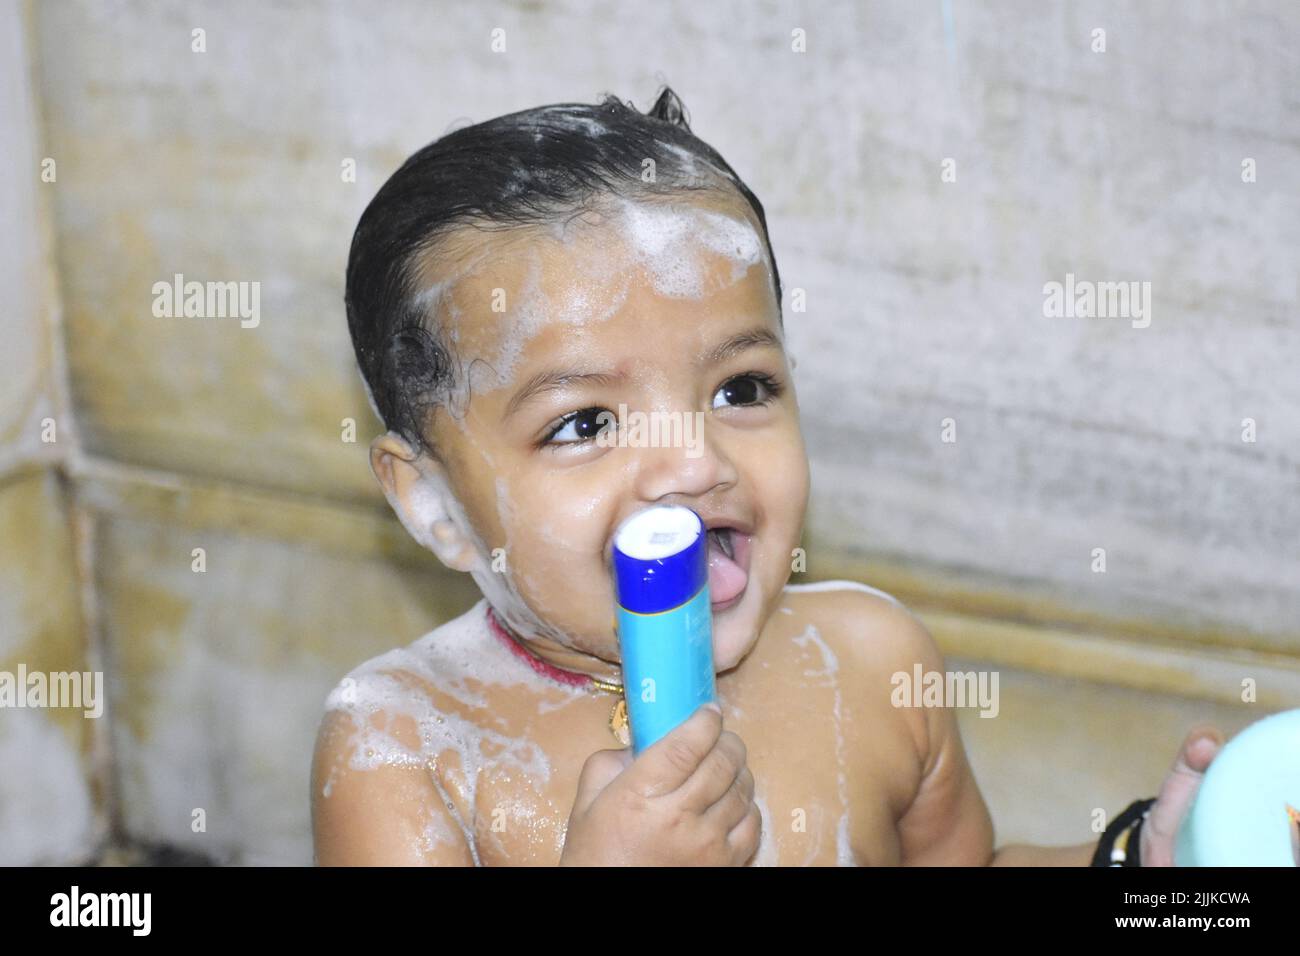 A portrait of a cheerful cute Indian baby holding a shampoo with foam all over his body taking a bath Stock Photo